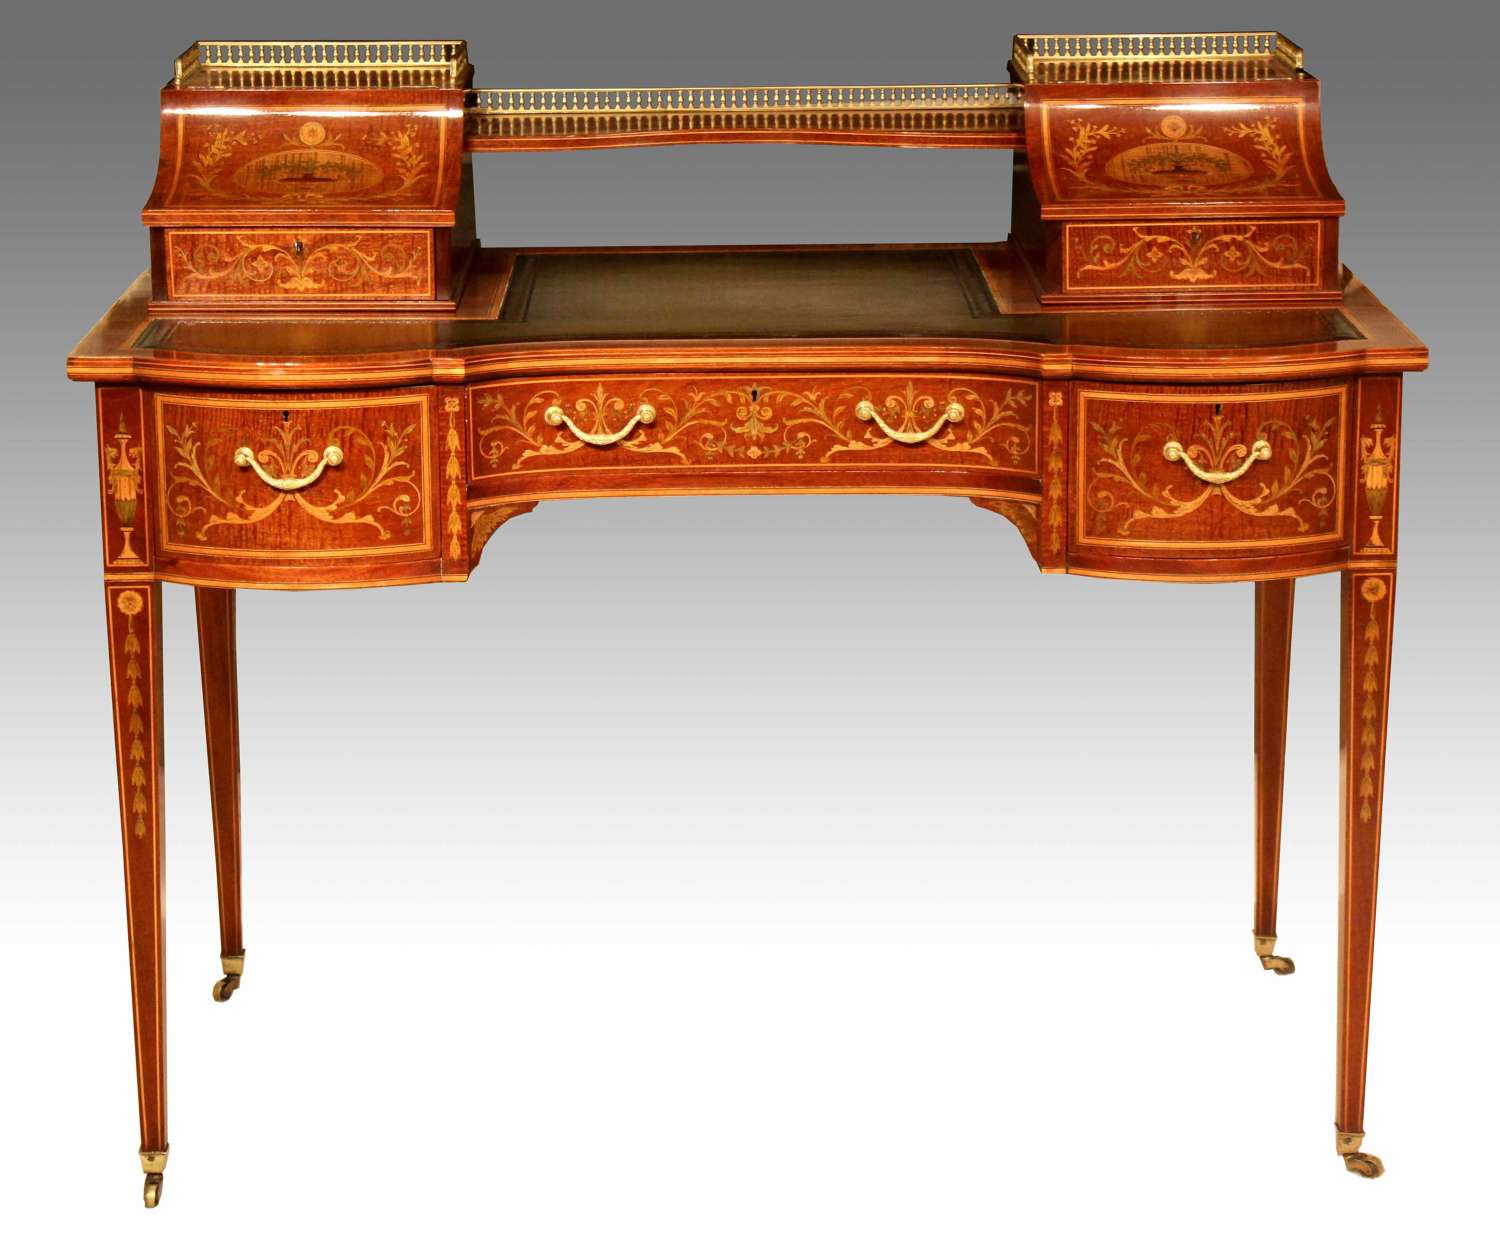 A Late Victorian Mahogany Inlaid Carleton House Style Desk